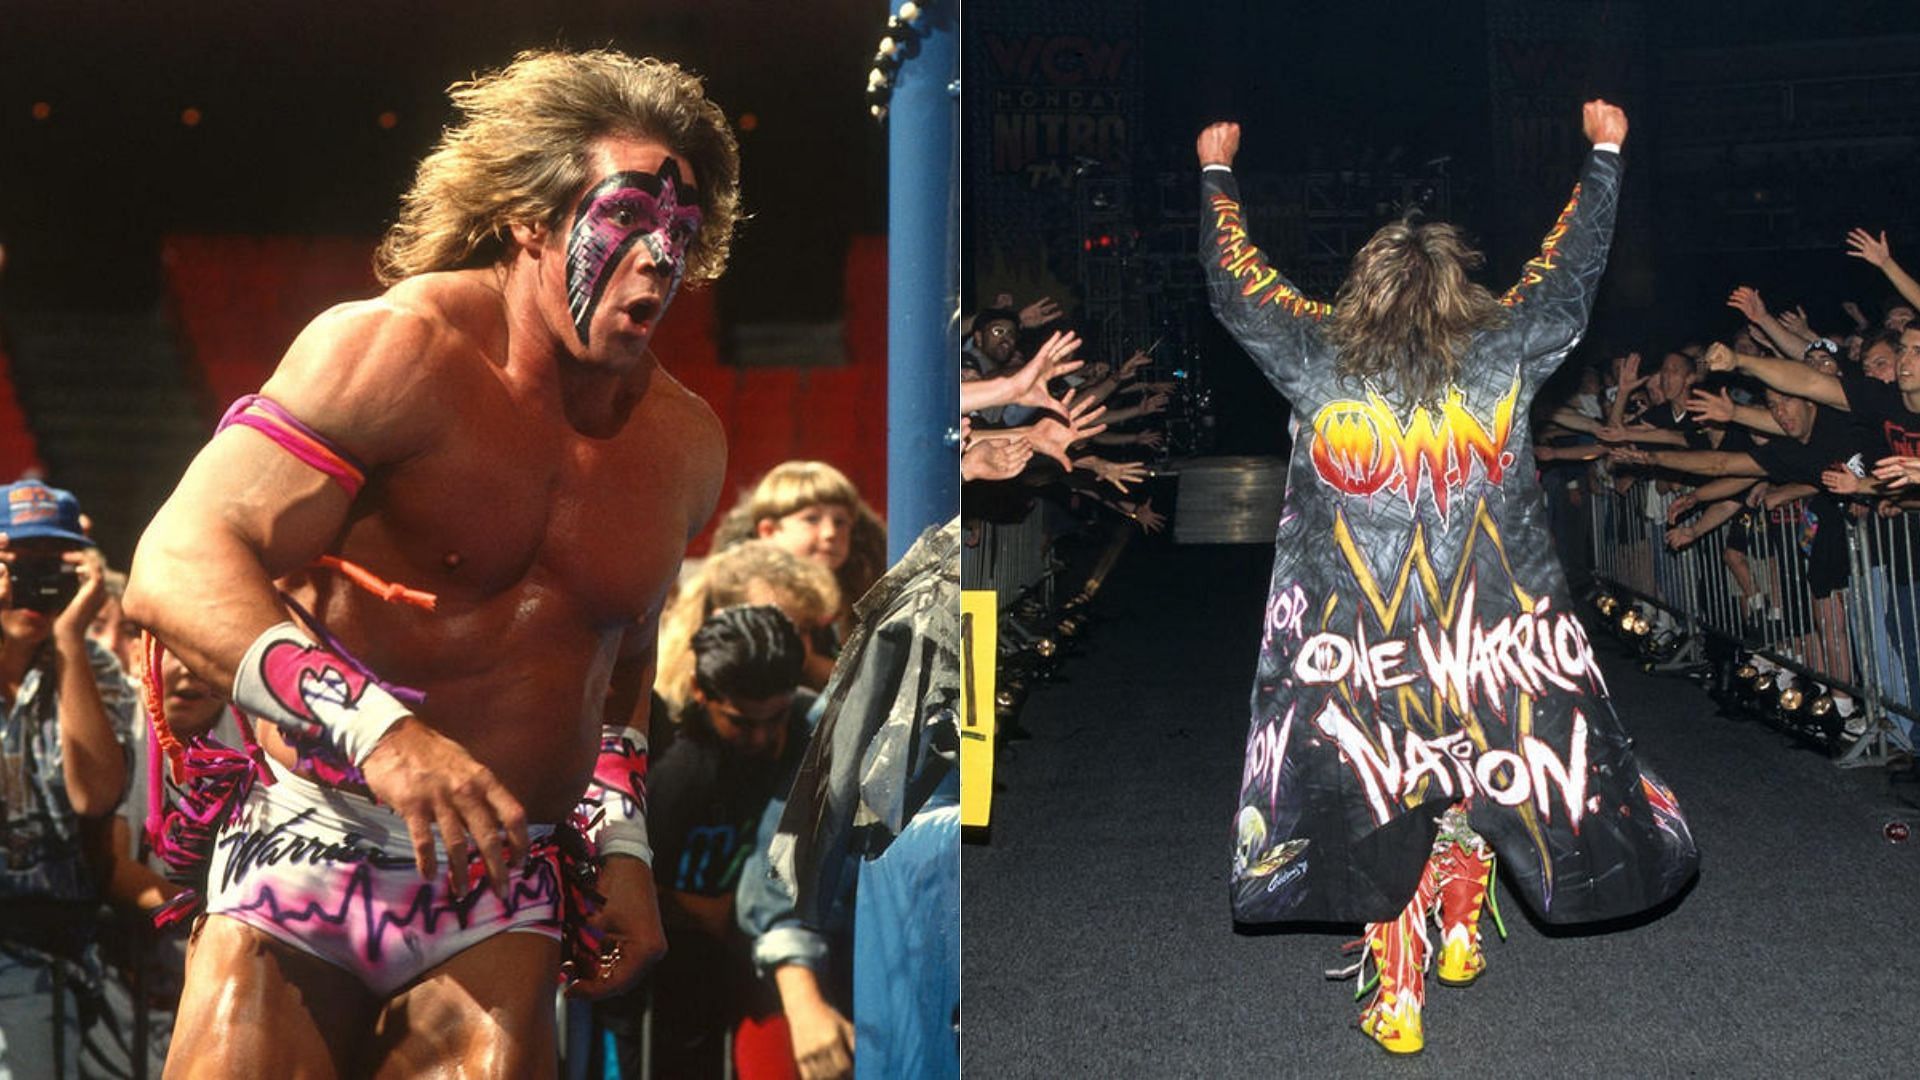 The Ultimate Warrior divides opinion among fans and wrestlers